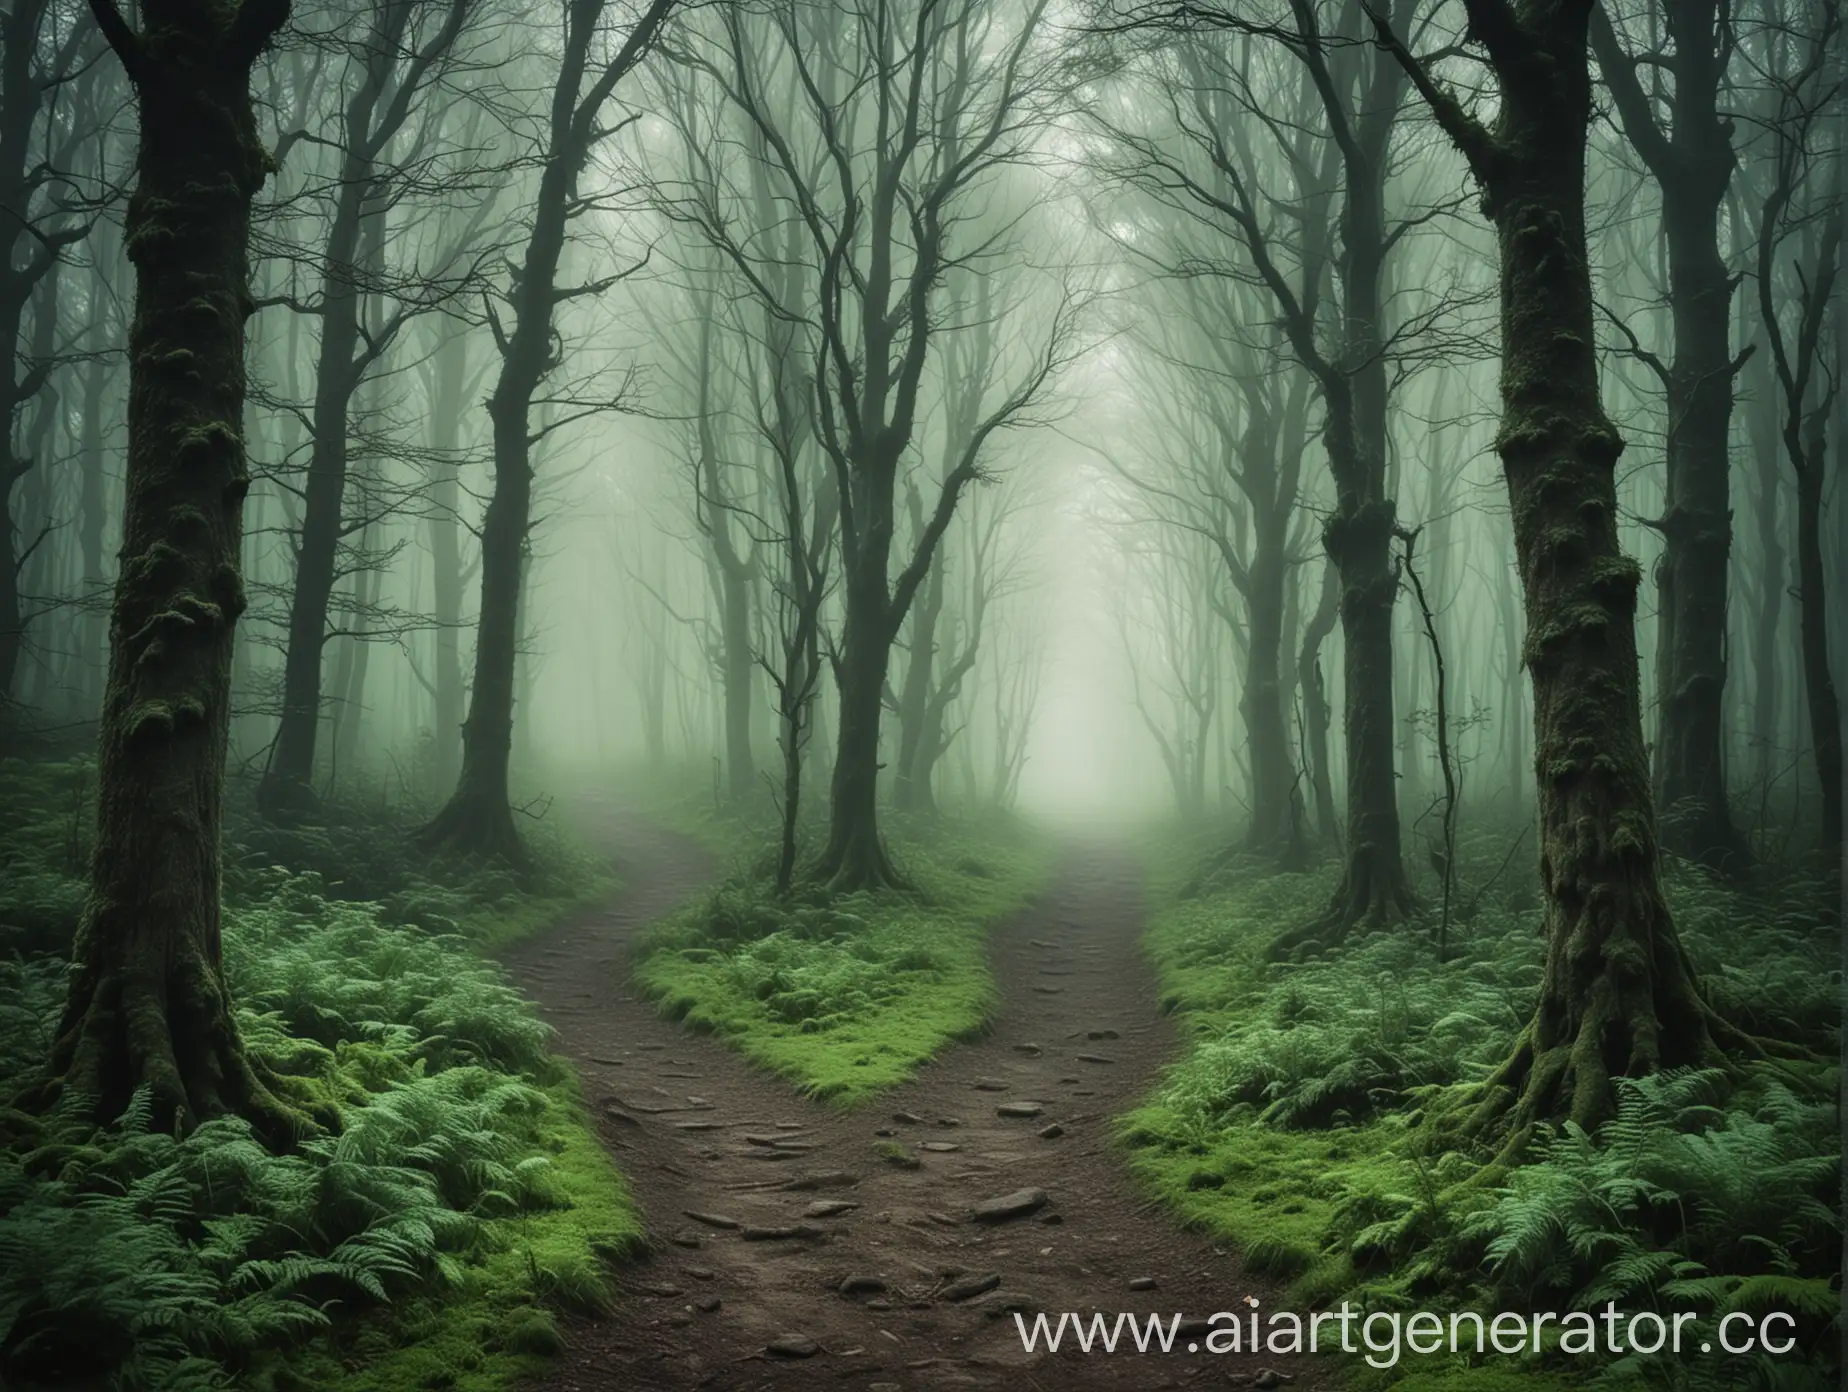 Enchanted-Path-Through-Mysterious-Green-Forest-in-Fog